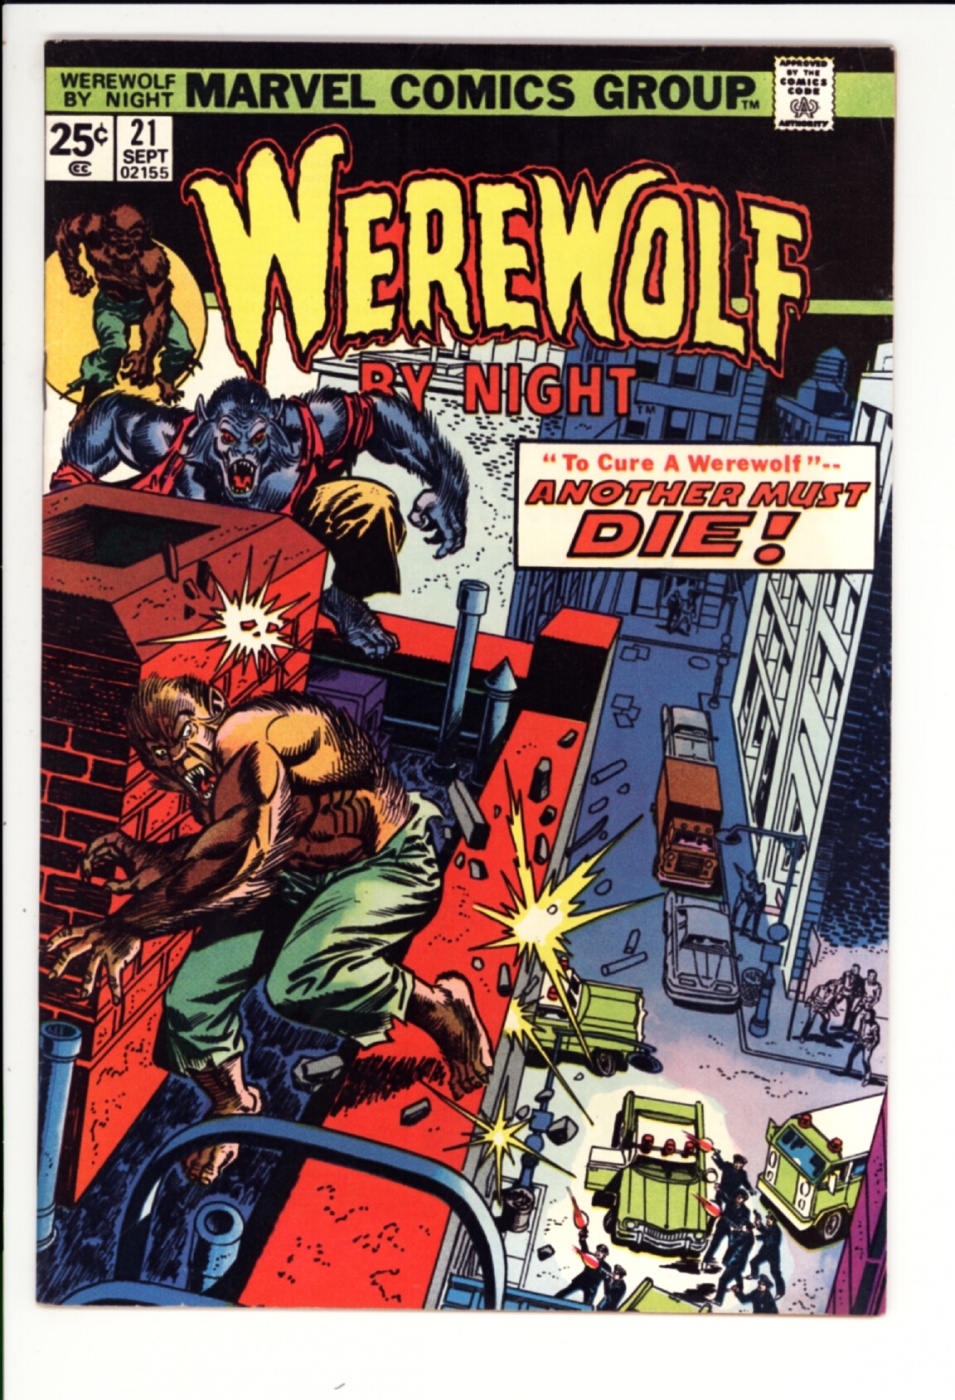 Werewolf by Night (1972) #28, Comic Issues